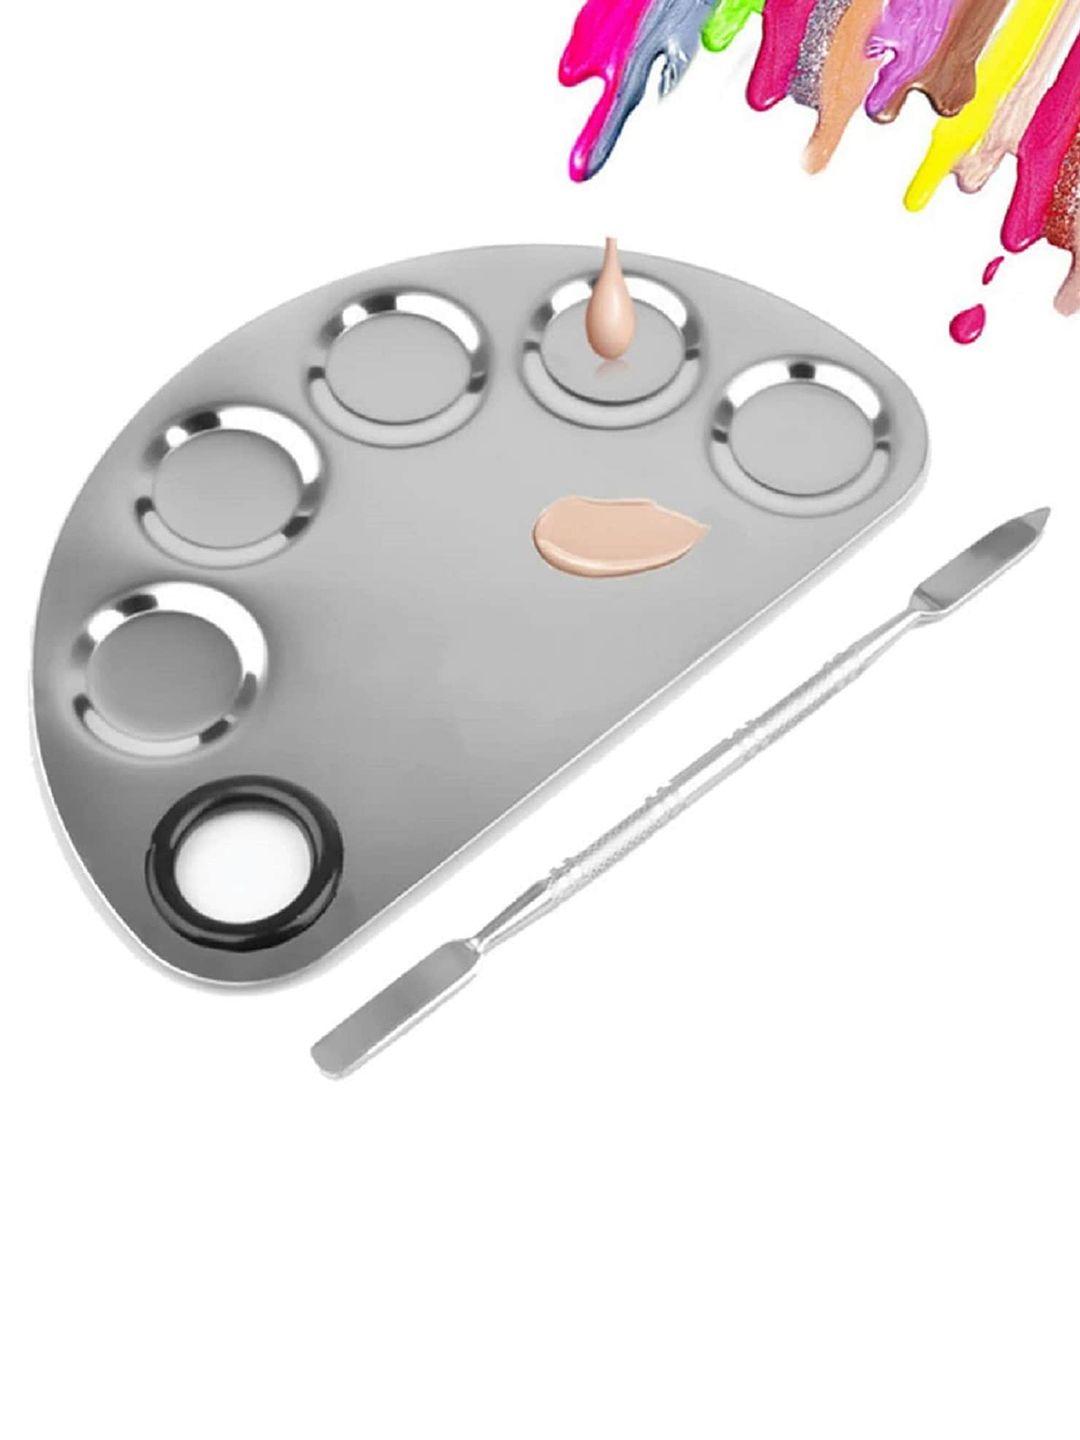 beaute secrets 5-well stainless steel makeup palette with spatula - silver toned